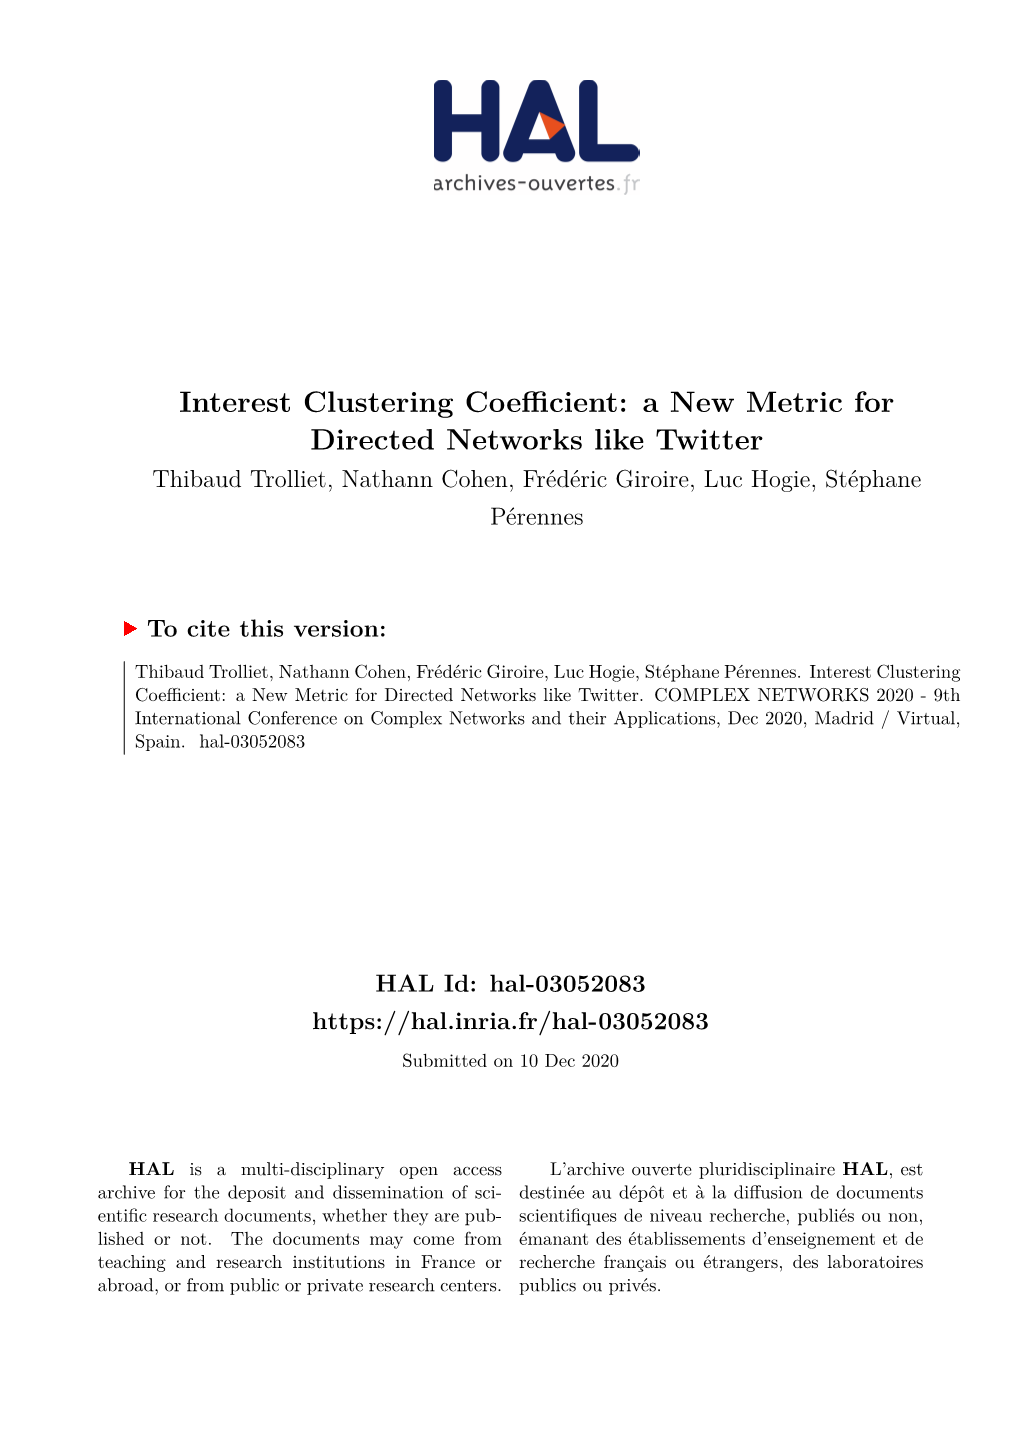 Interest Clustering Coefficient: a New Metric for Directed Networks Like Twitter